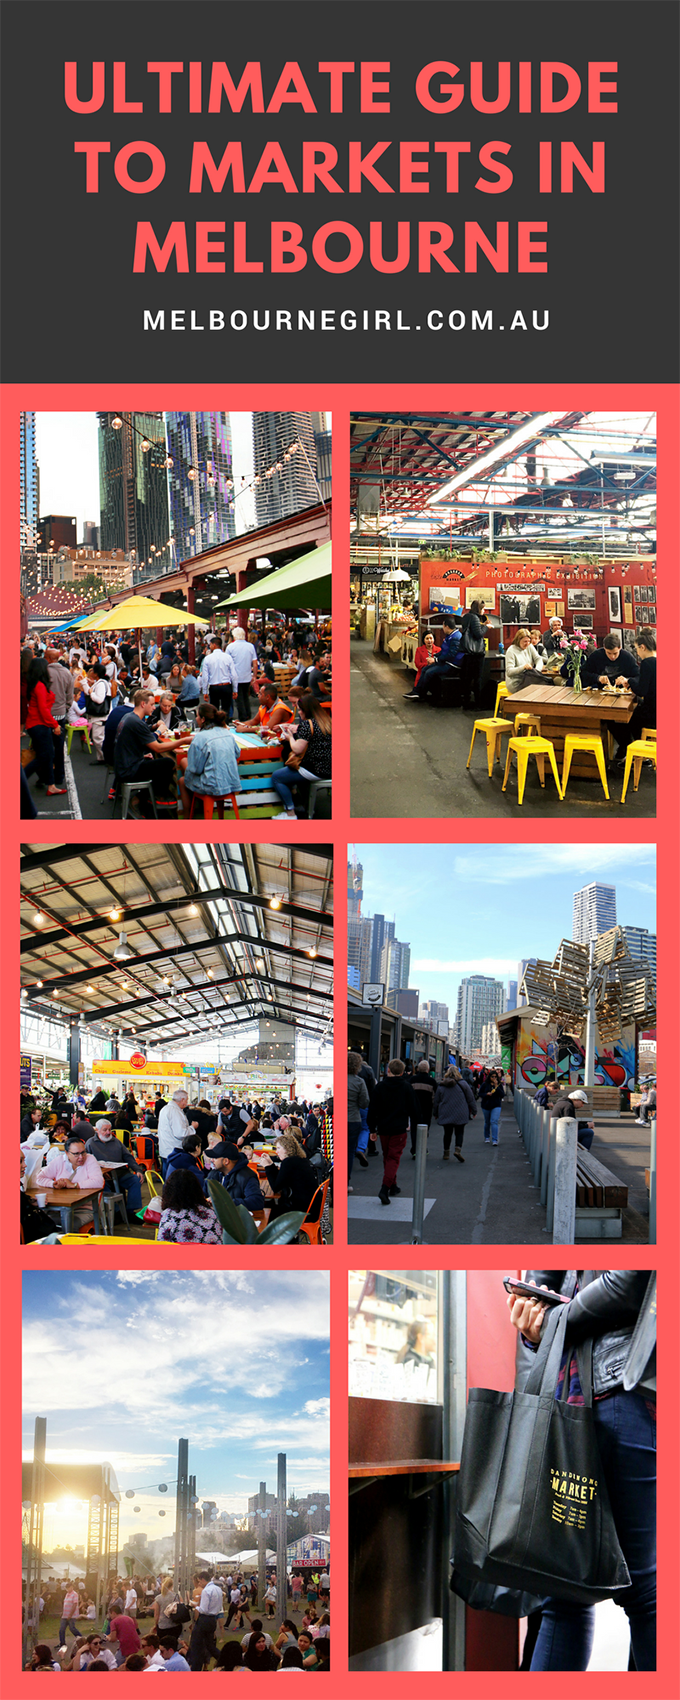 Ultimate Guide to Markets in Melbourne